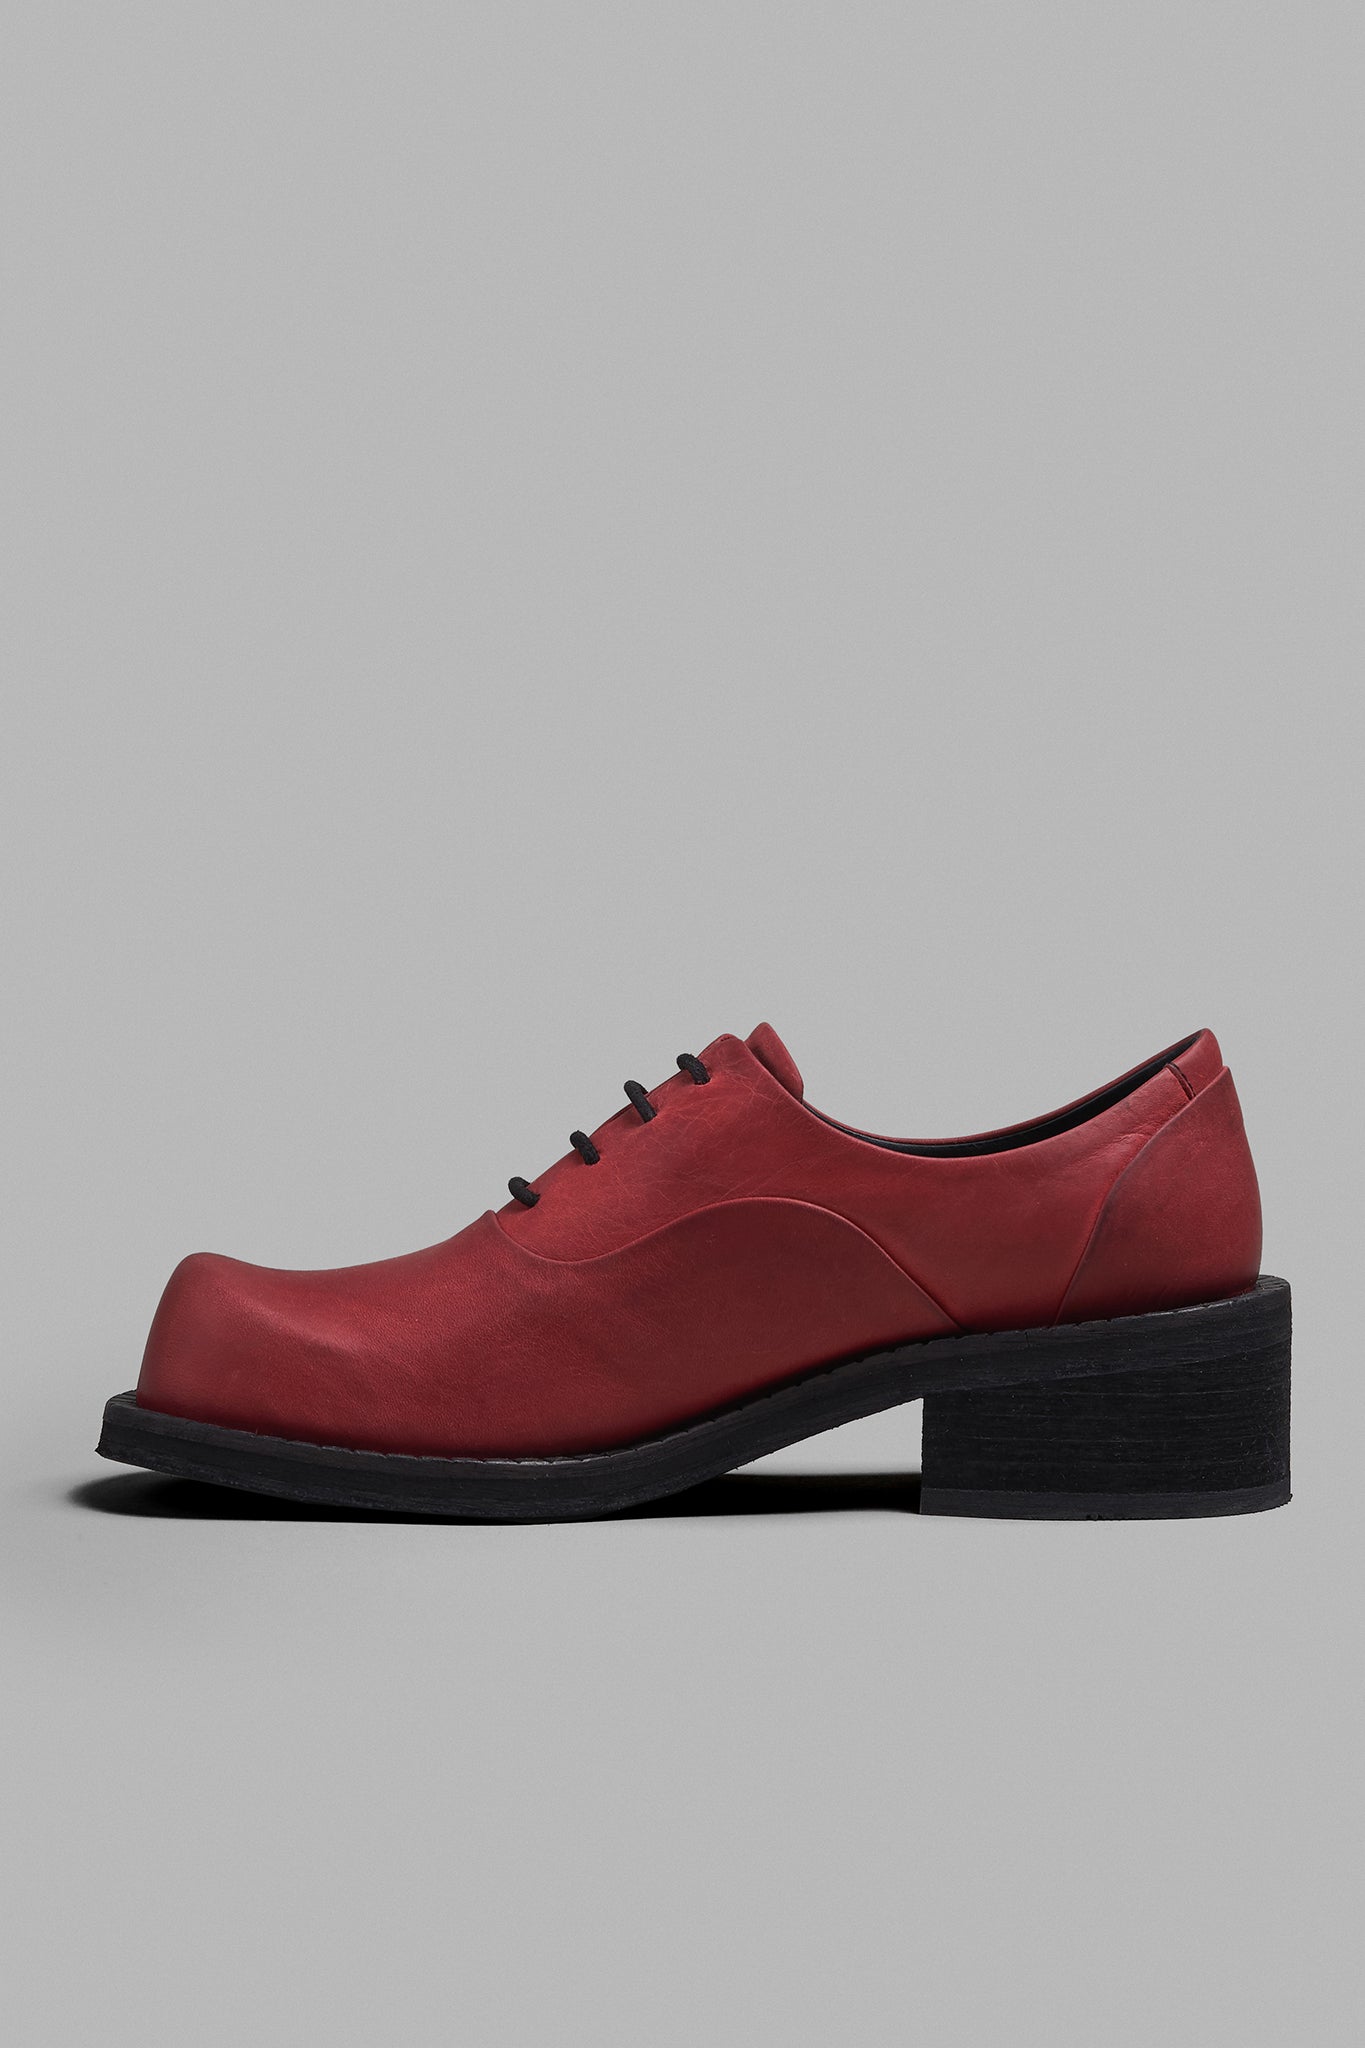 Wide Toe Oxford - Old Red